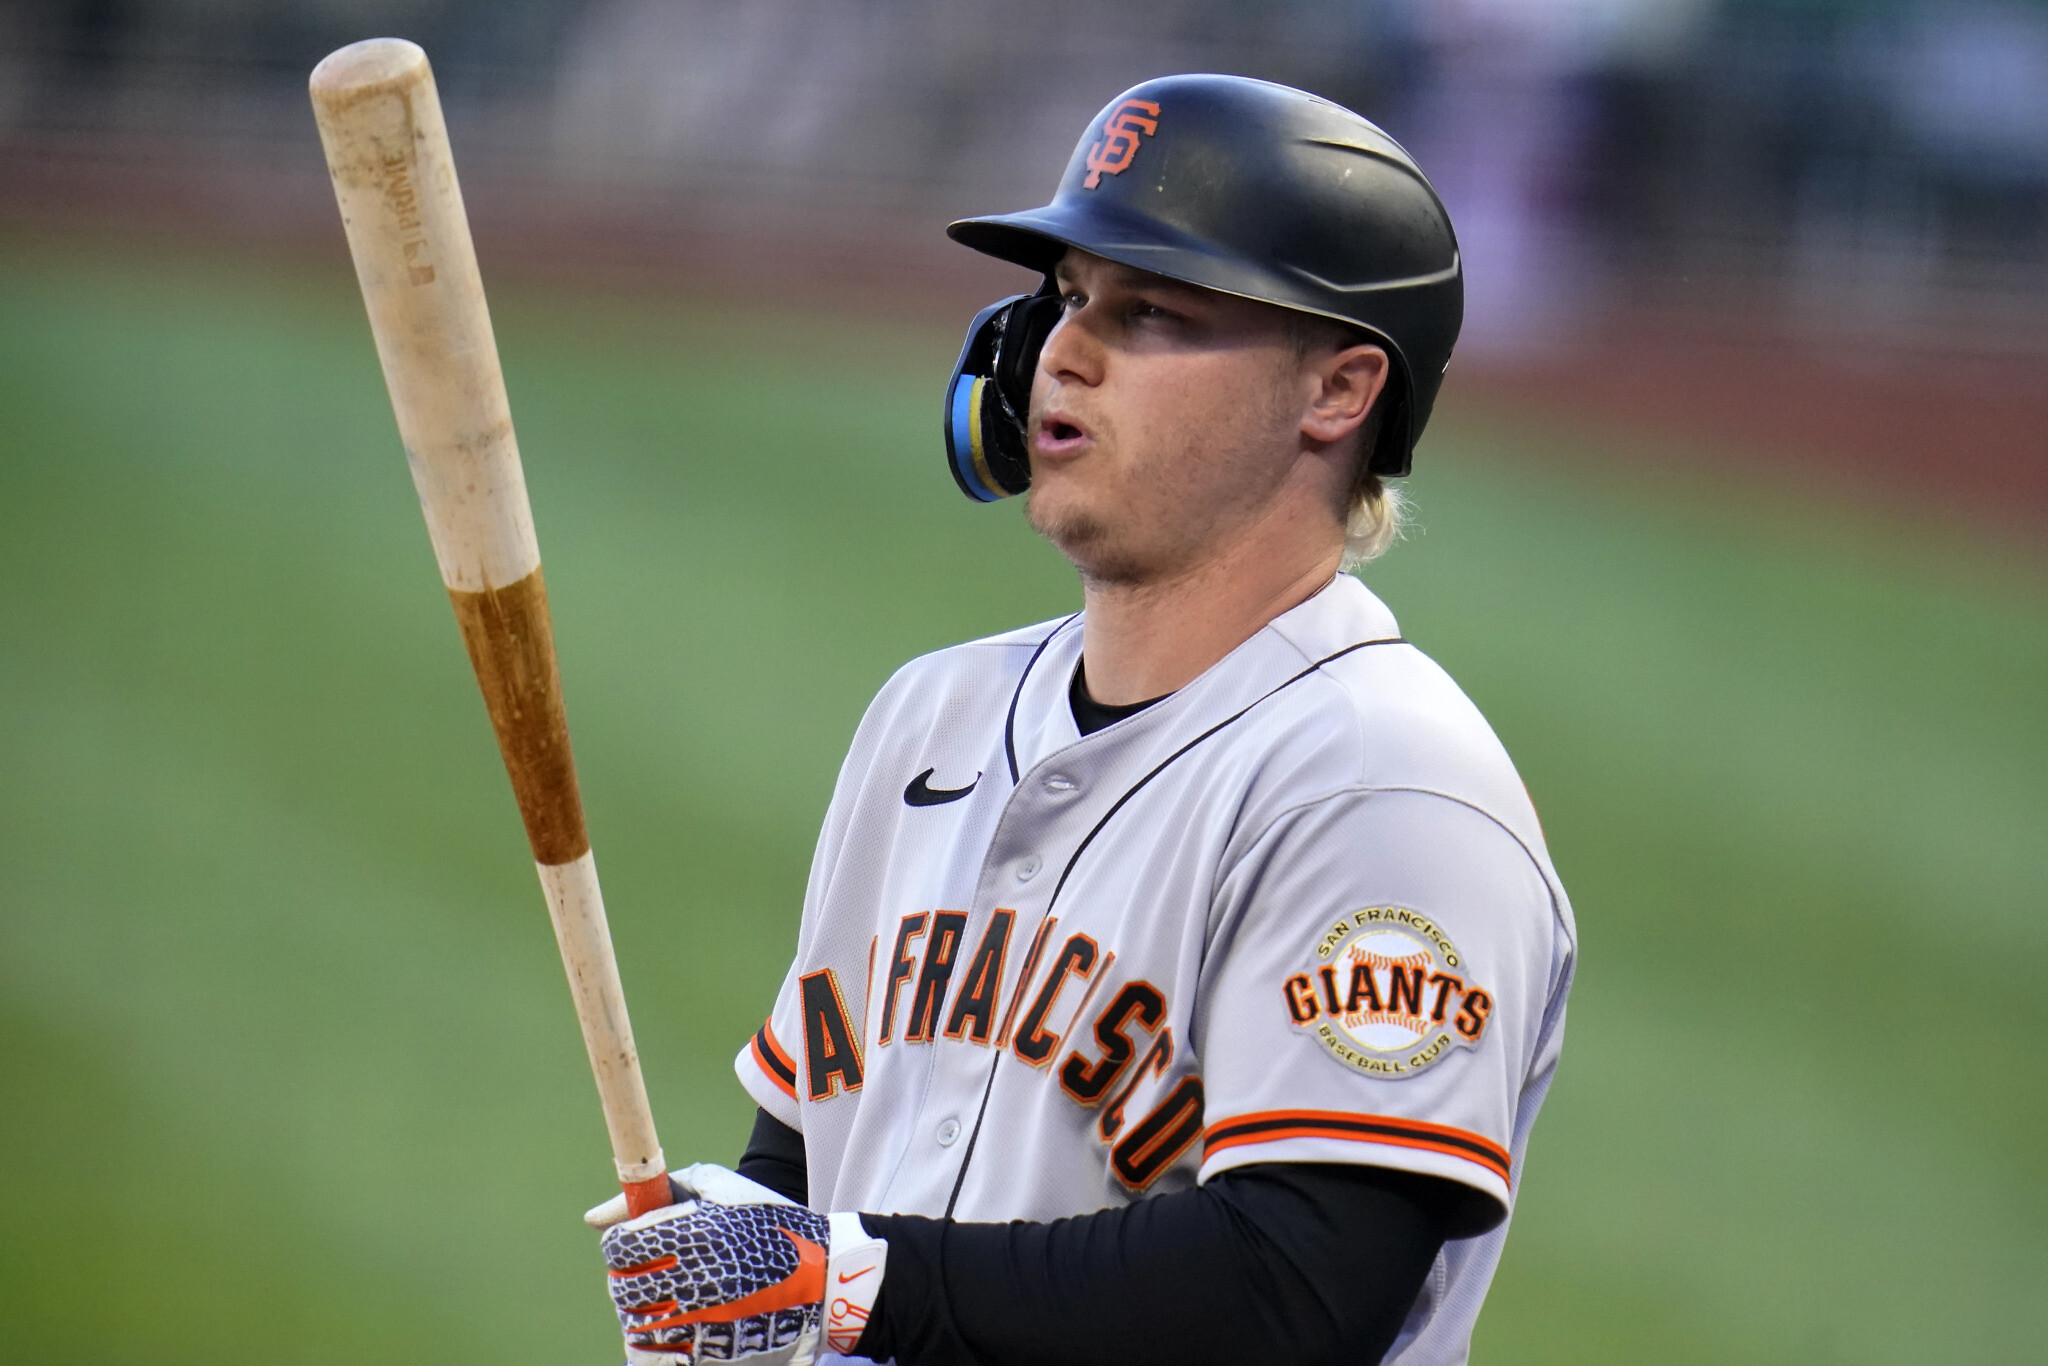 Joc and Champ Pederson auctioning off an on-field experience at SF Giants game